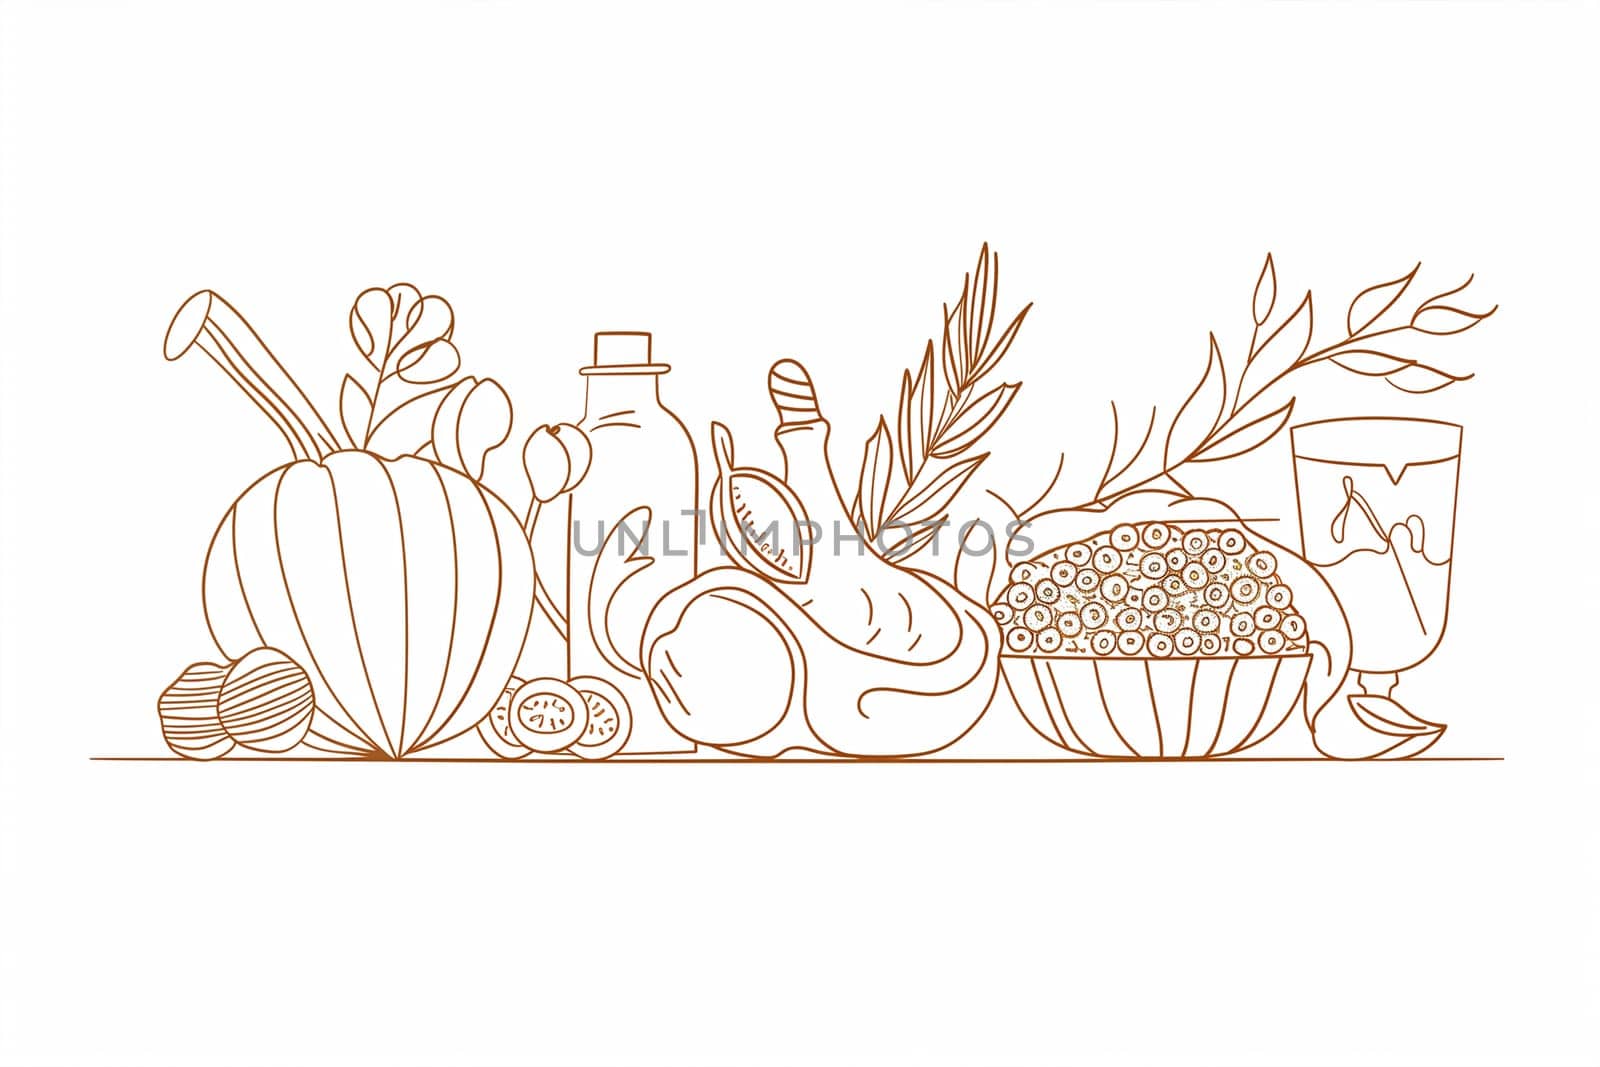 A line drawing featuring a variety of different foods, including fruits, vegetables, bread, and dairy products.